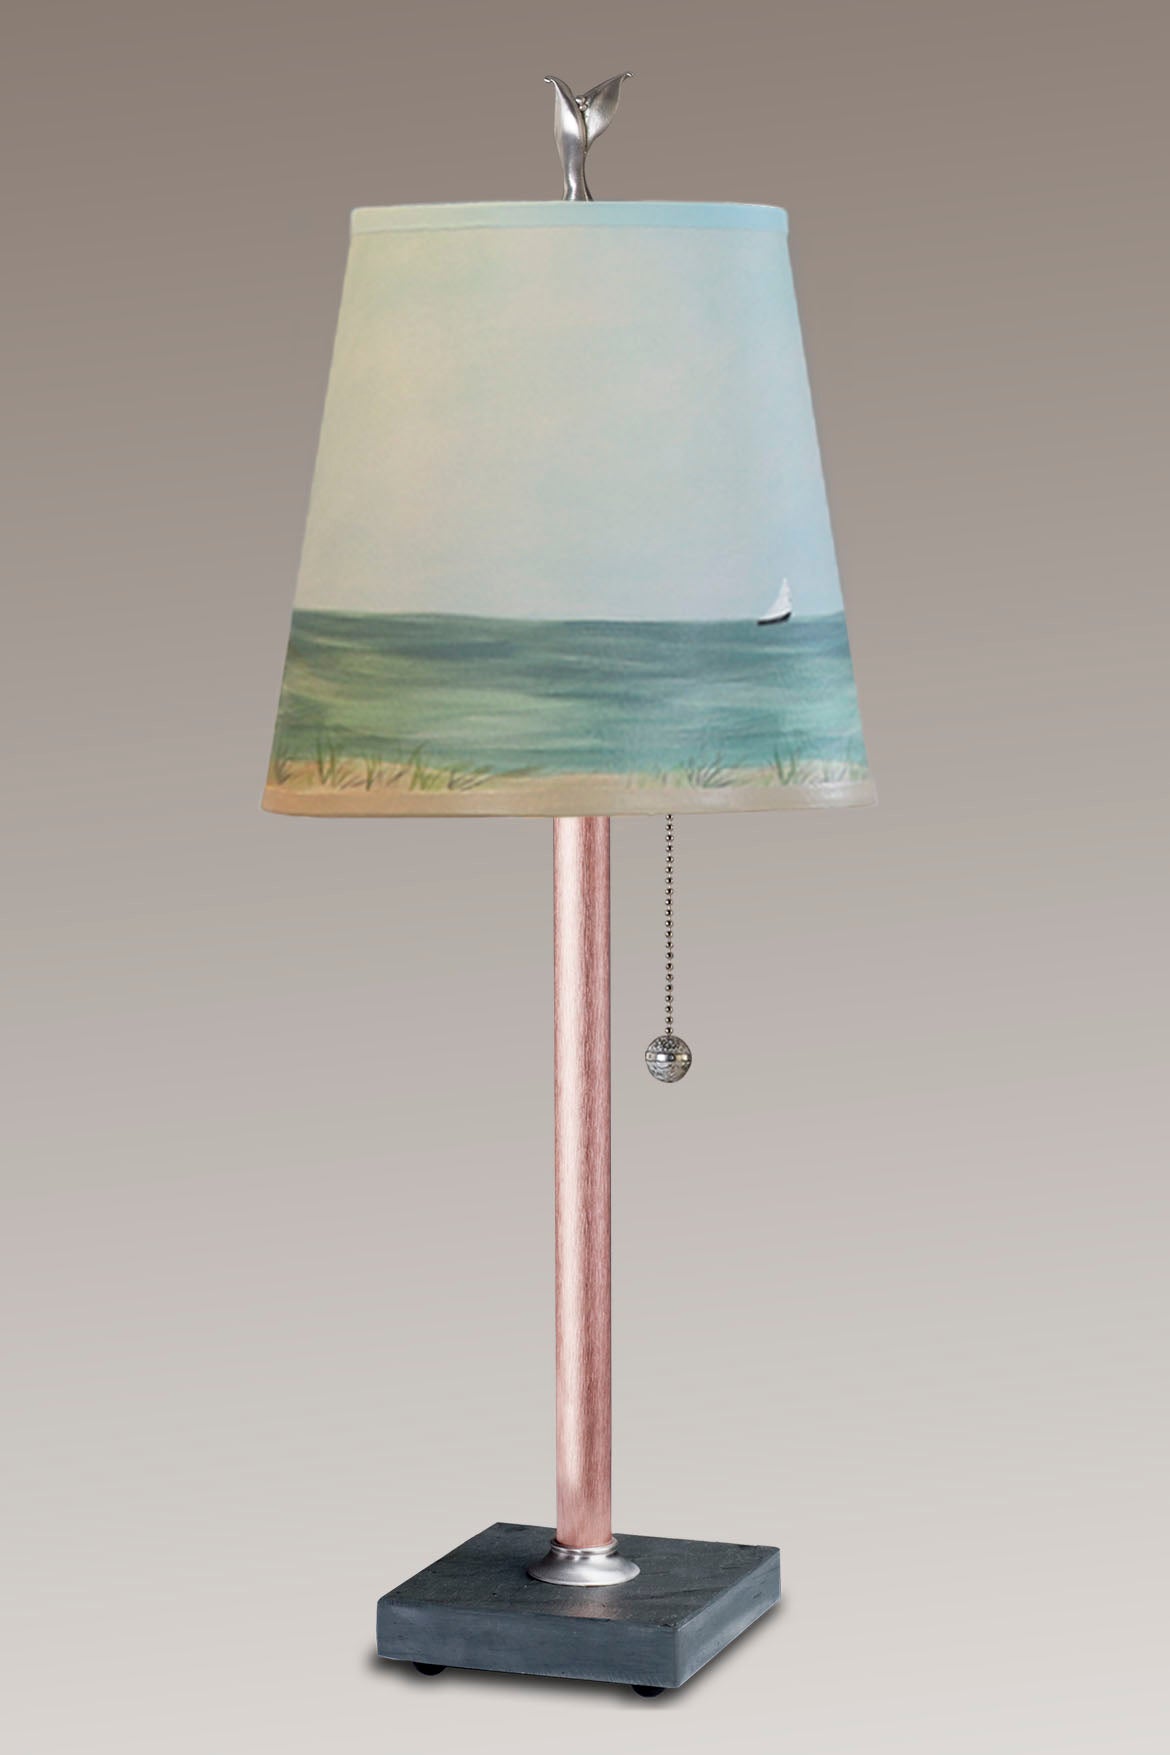 Janna Ugone & Co Table Lamps Copper Table Lamp with Small Drum Shade in Shore